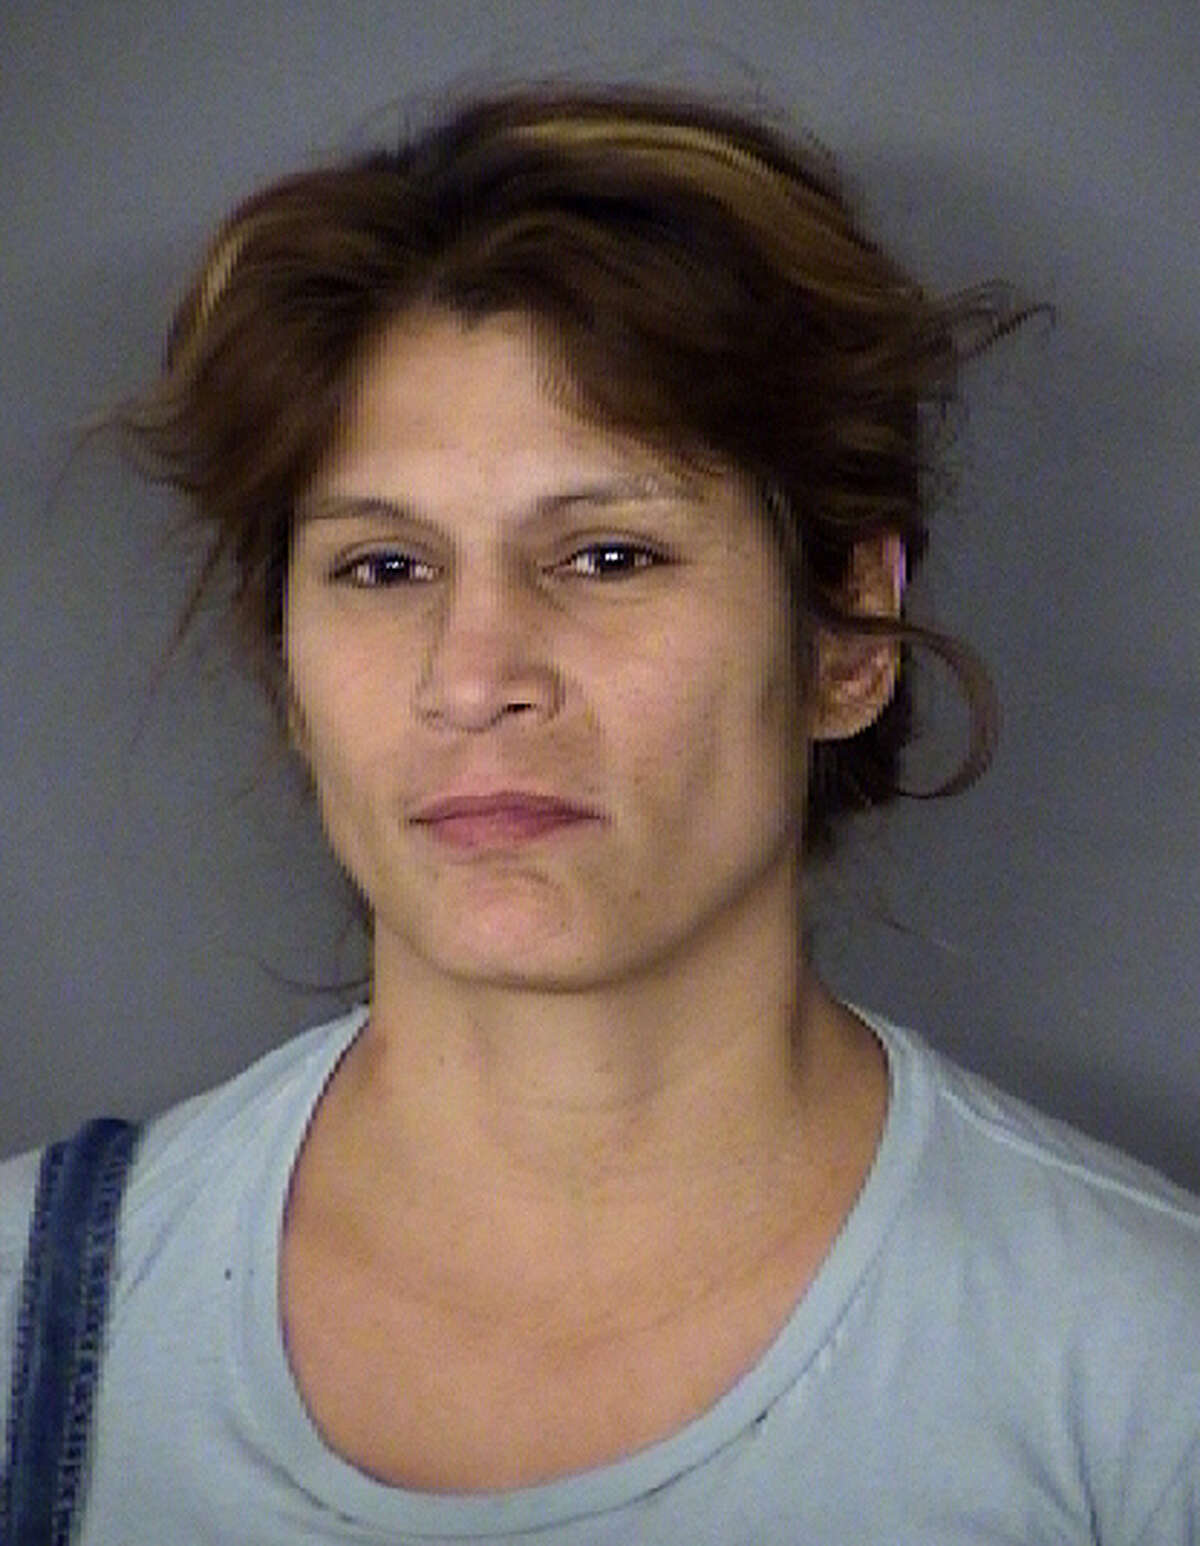 Connie Yanez, 36, was arrested and charged with one count of murder on Sunday, May 5, 2013, in the slaying of Albert Guerra, 56.